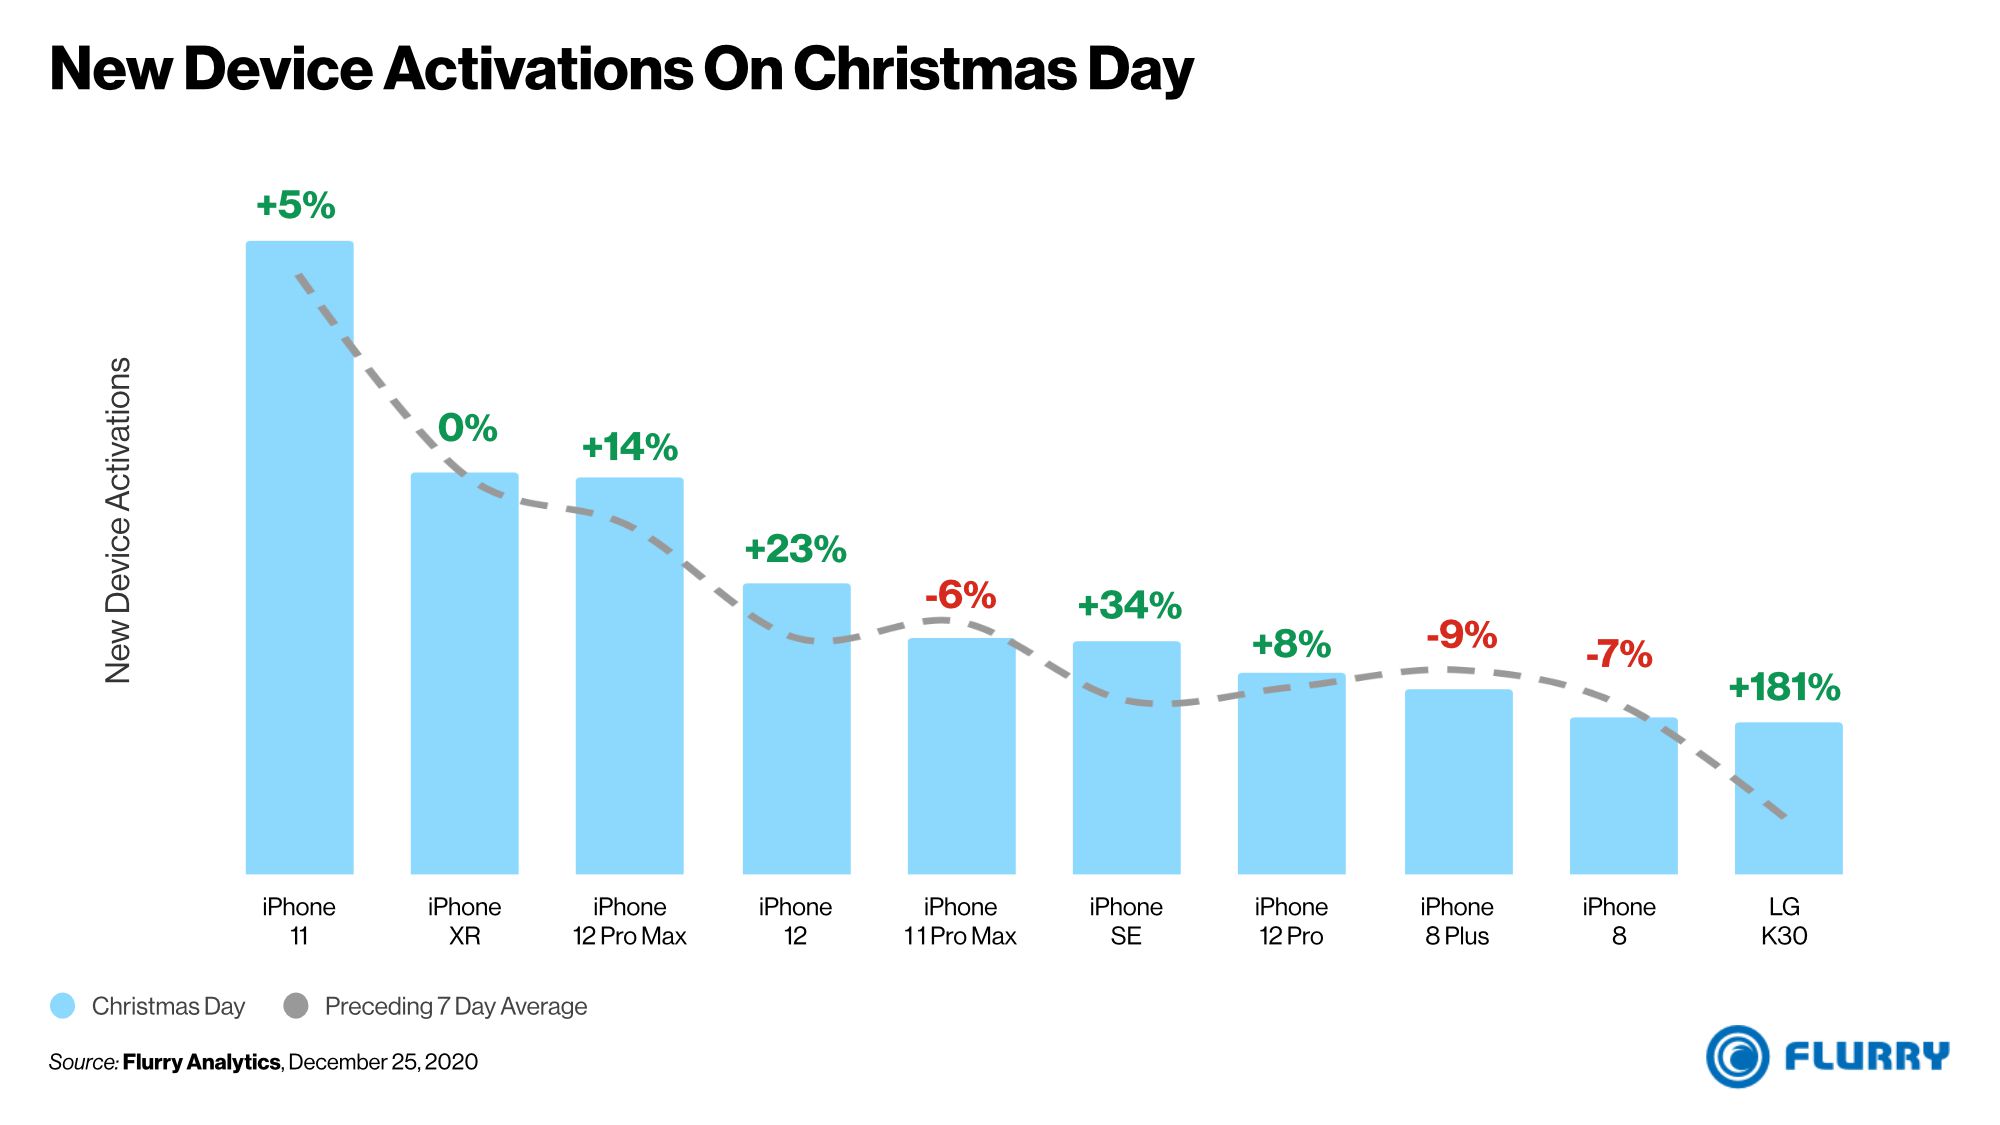 9 of Top 10 U.S. Smartphone Activations on Christmas Day 2020 Were iPhones